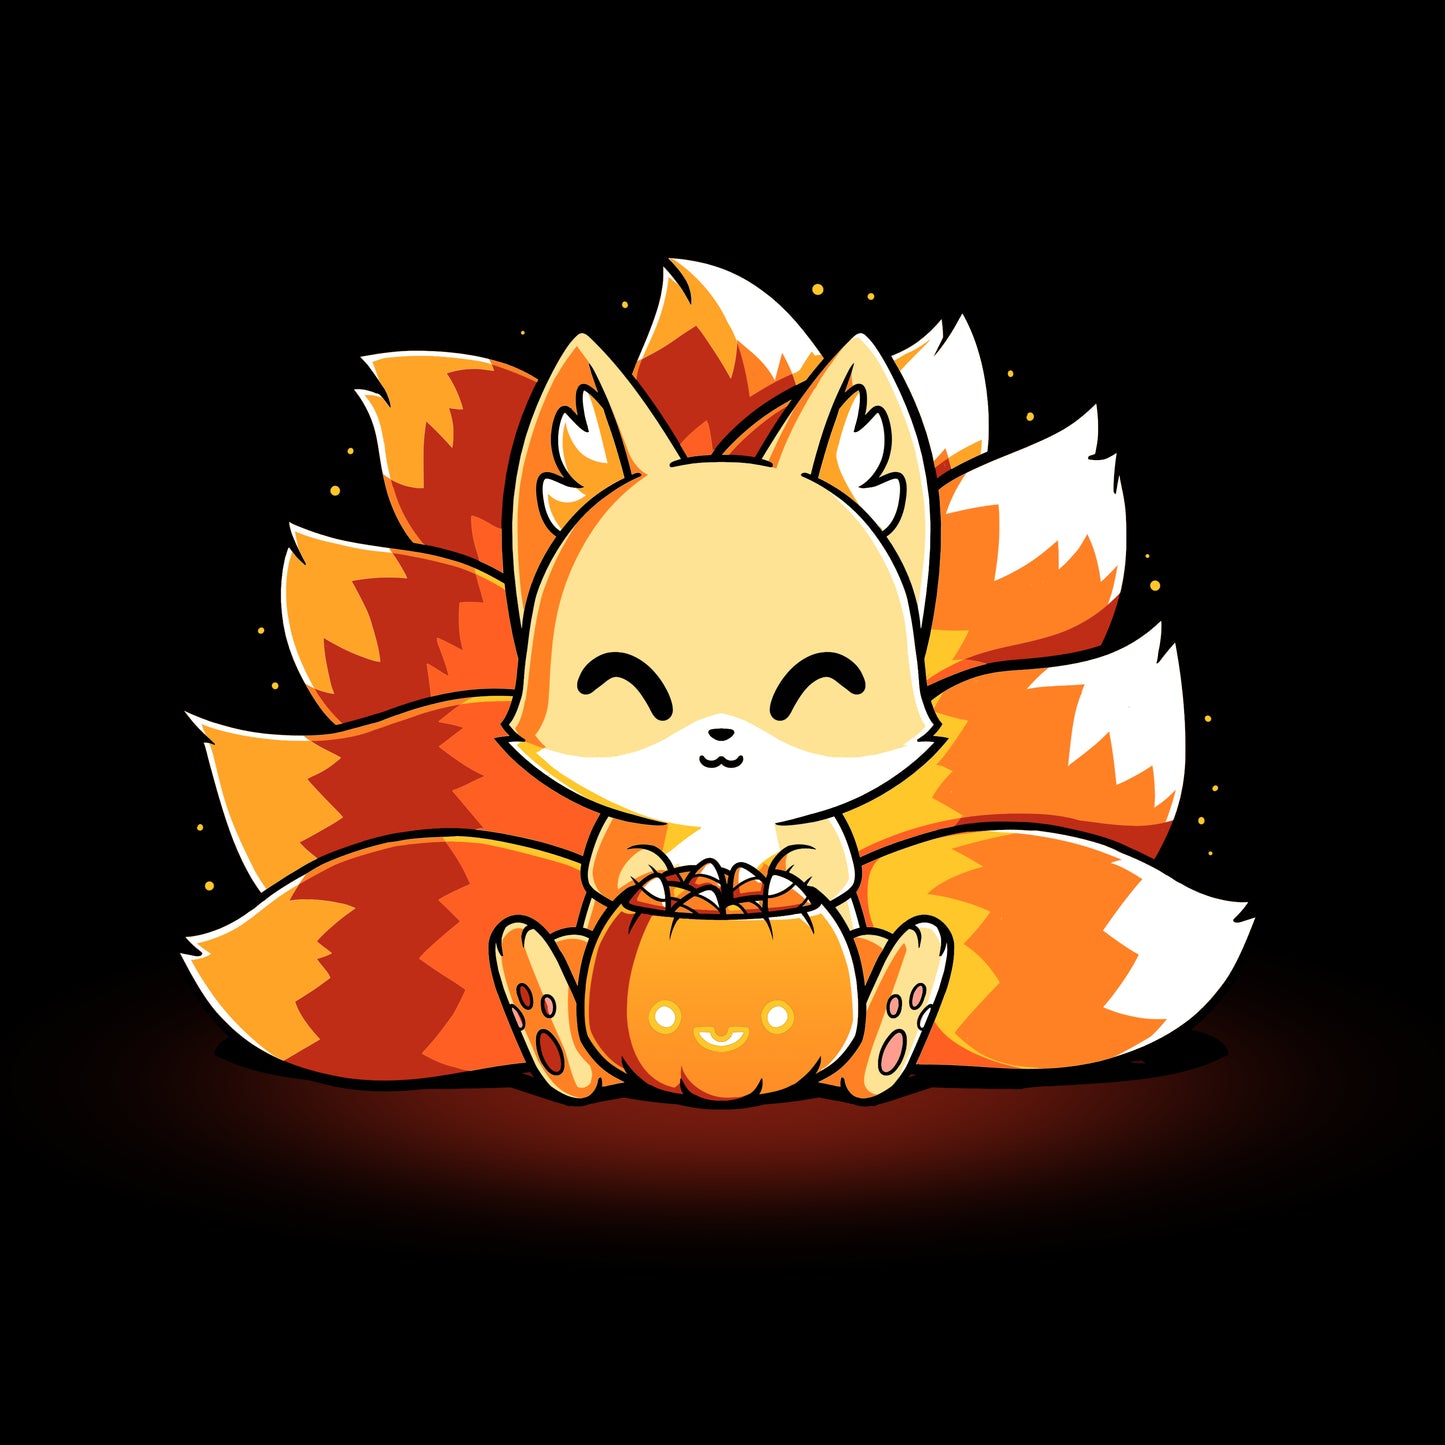 A cute, chibi-style nine-tailed fox with orange and white fur, known as the Candy Corn Kitsune, sits joyfully holding an orange pumpkin against a black backdrop. This delightful scene is beautifully printed on a super soft ringspun cotton black t-shirt by monsterdigital.